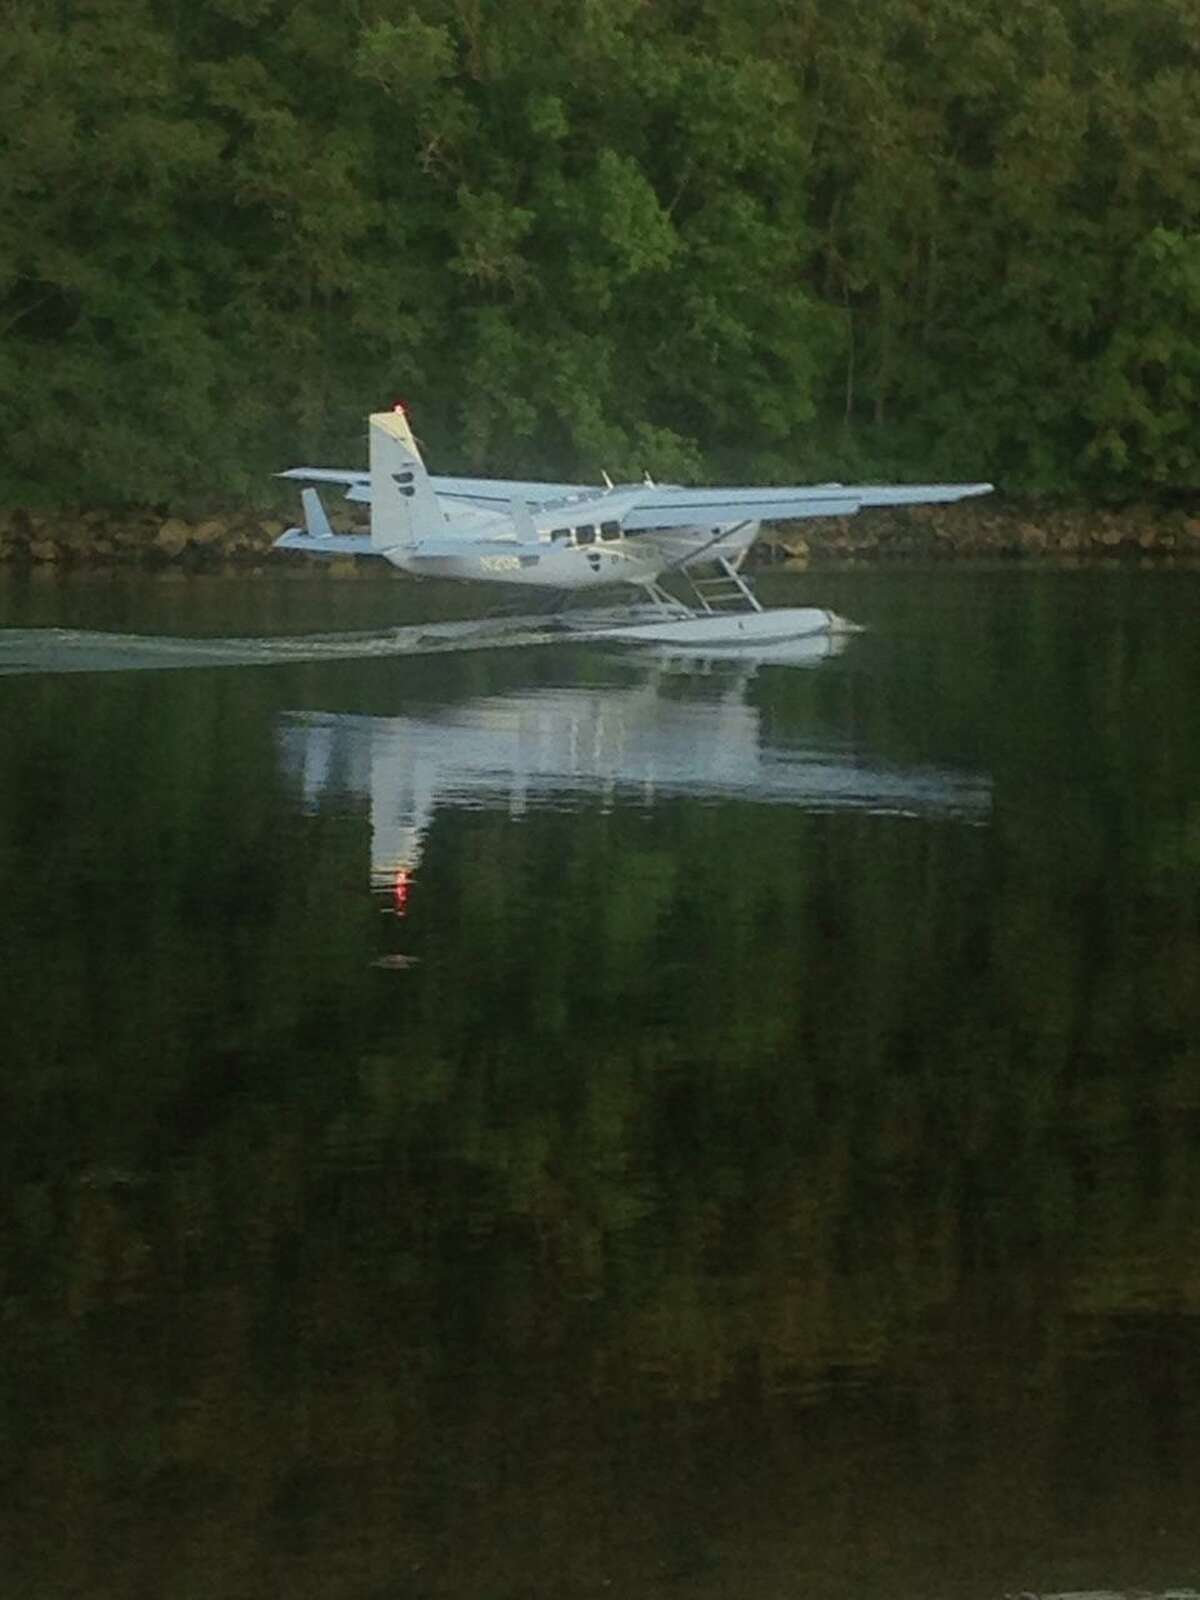 Echo Hose Hook & Ladder Co. 1 aided on an emergency aircraft landing on the Housatonic River on Friday, Aug. 16.